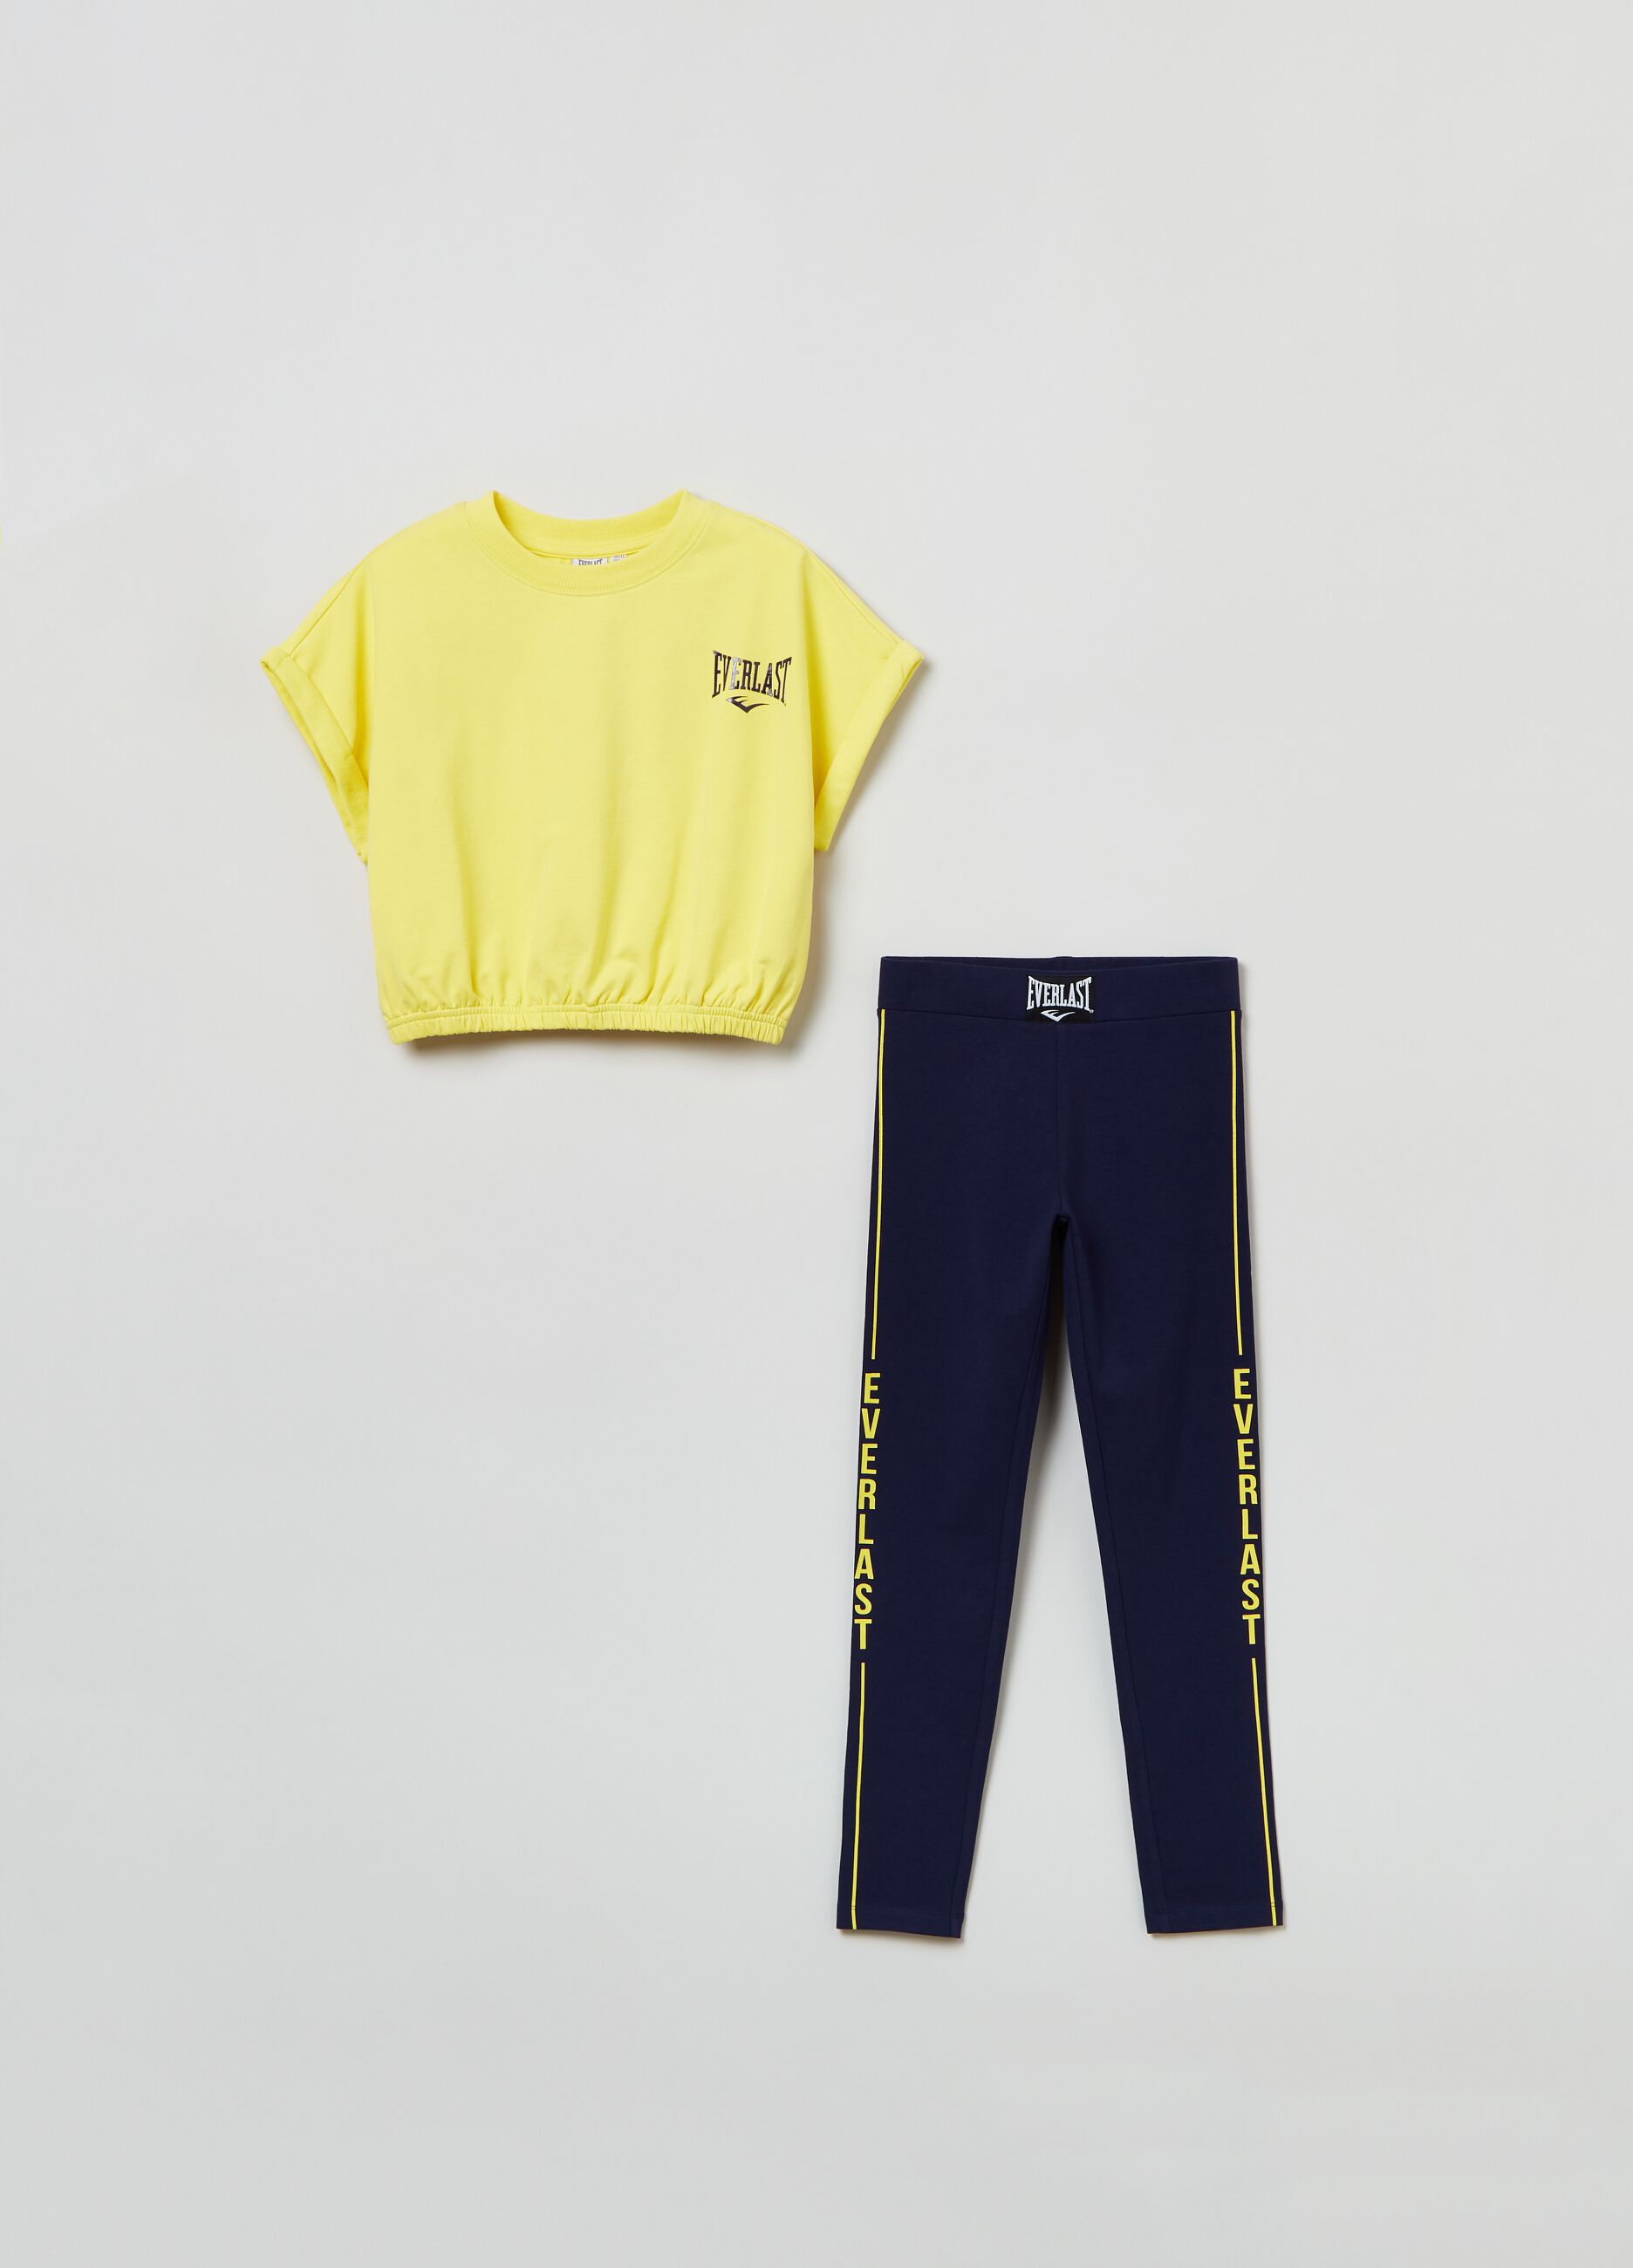 Everlast jogging set with T-shirt and leggings